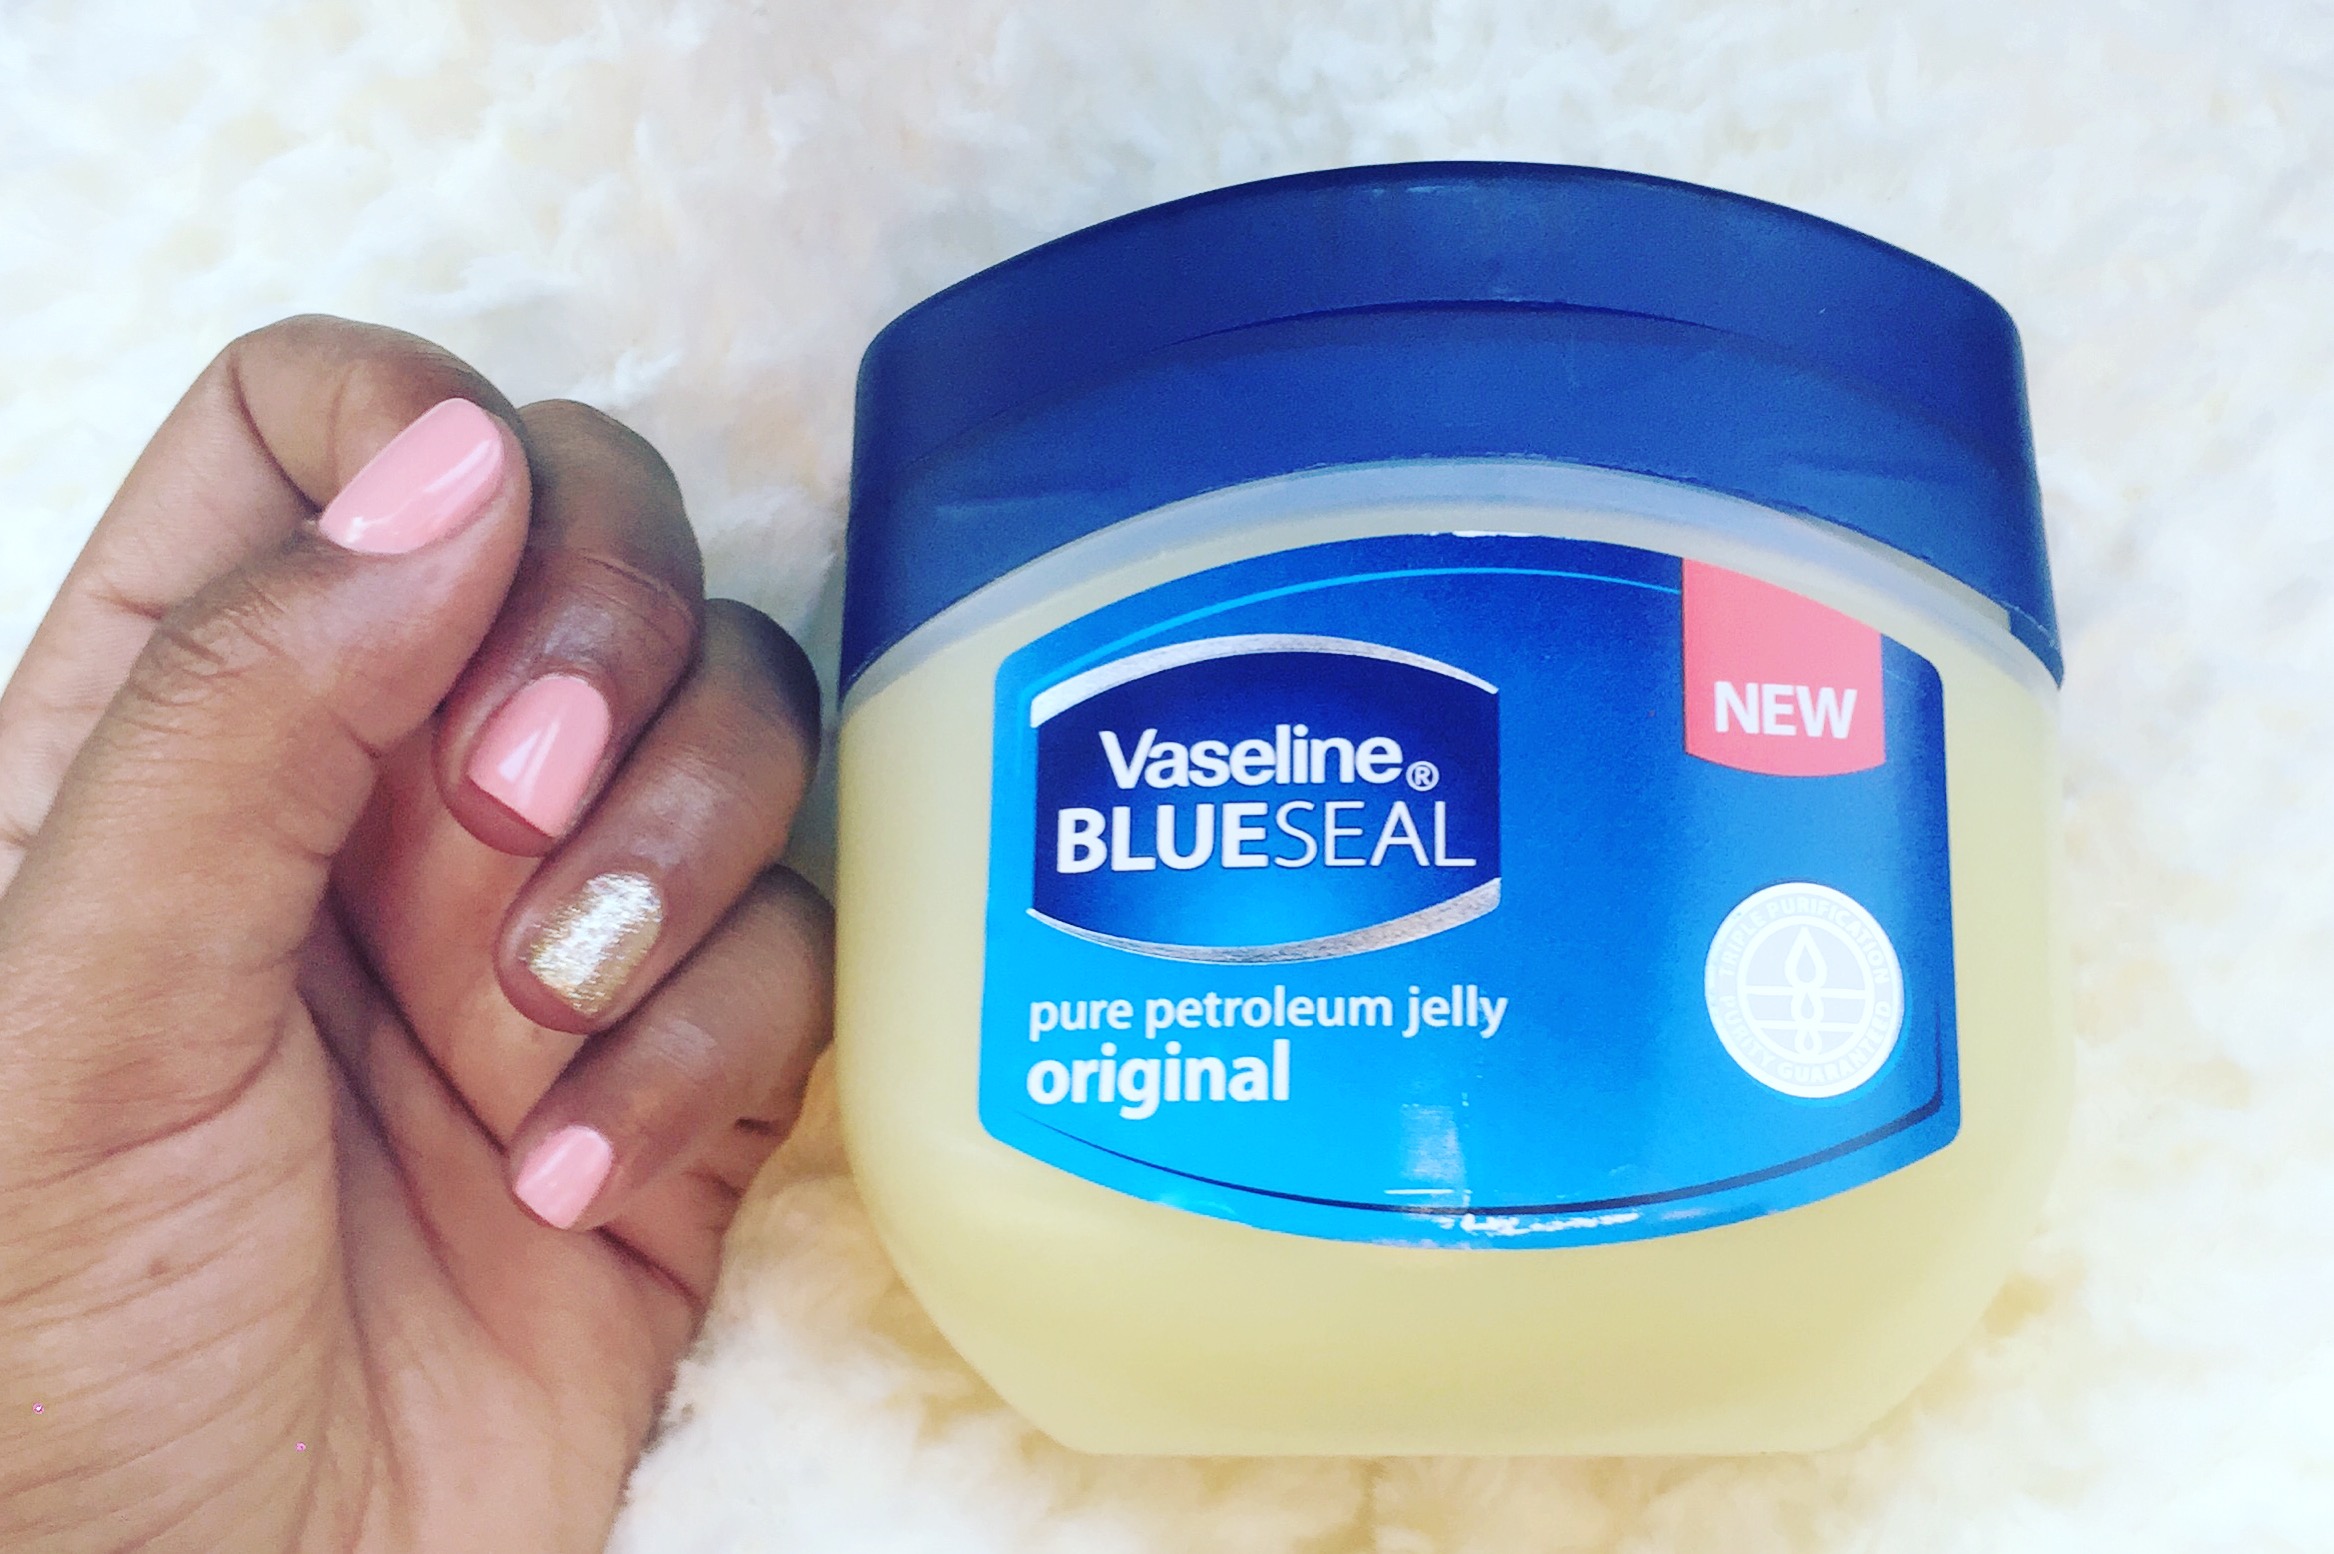 15 Uses Of Vaseline You Didn't Know - Youth Village Kenya